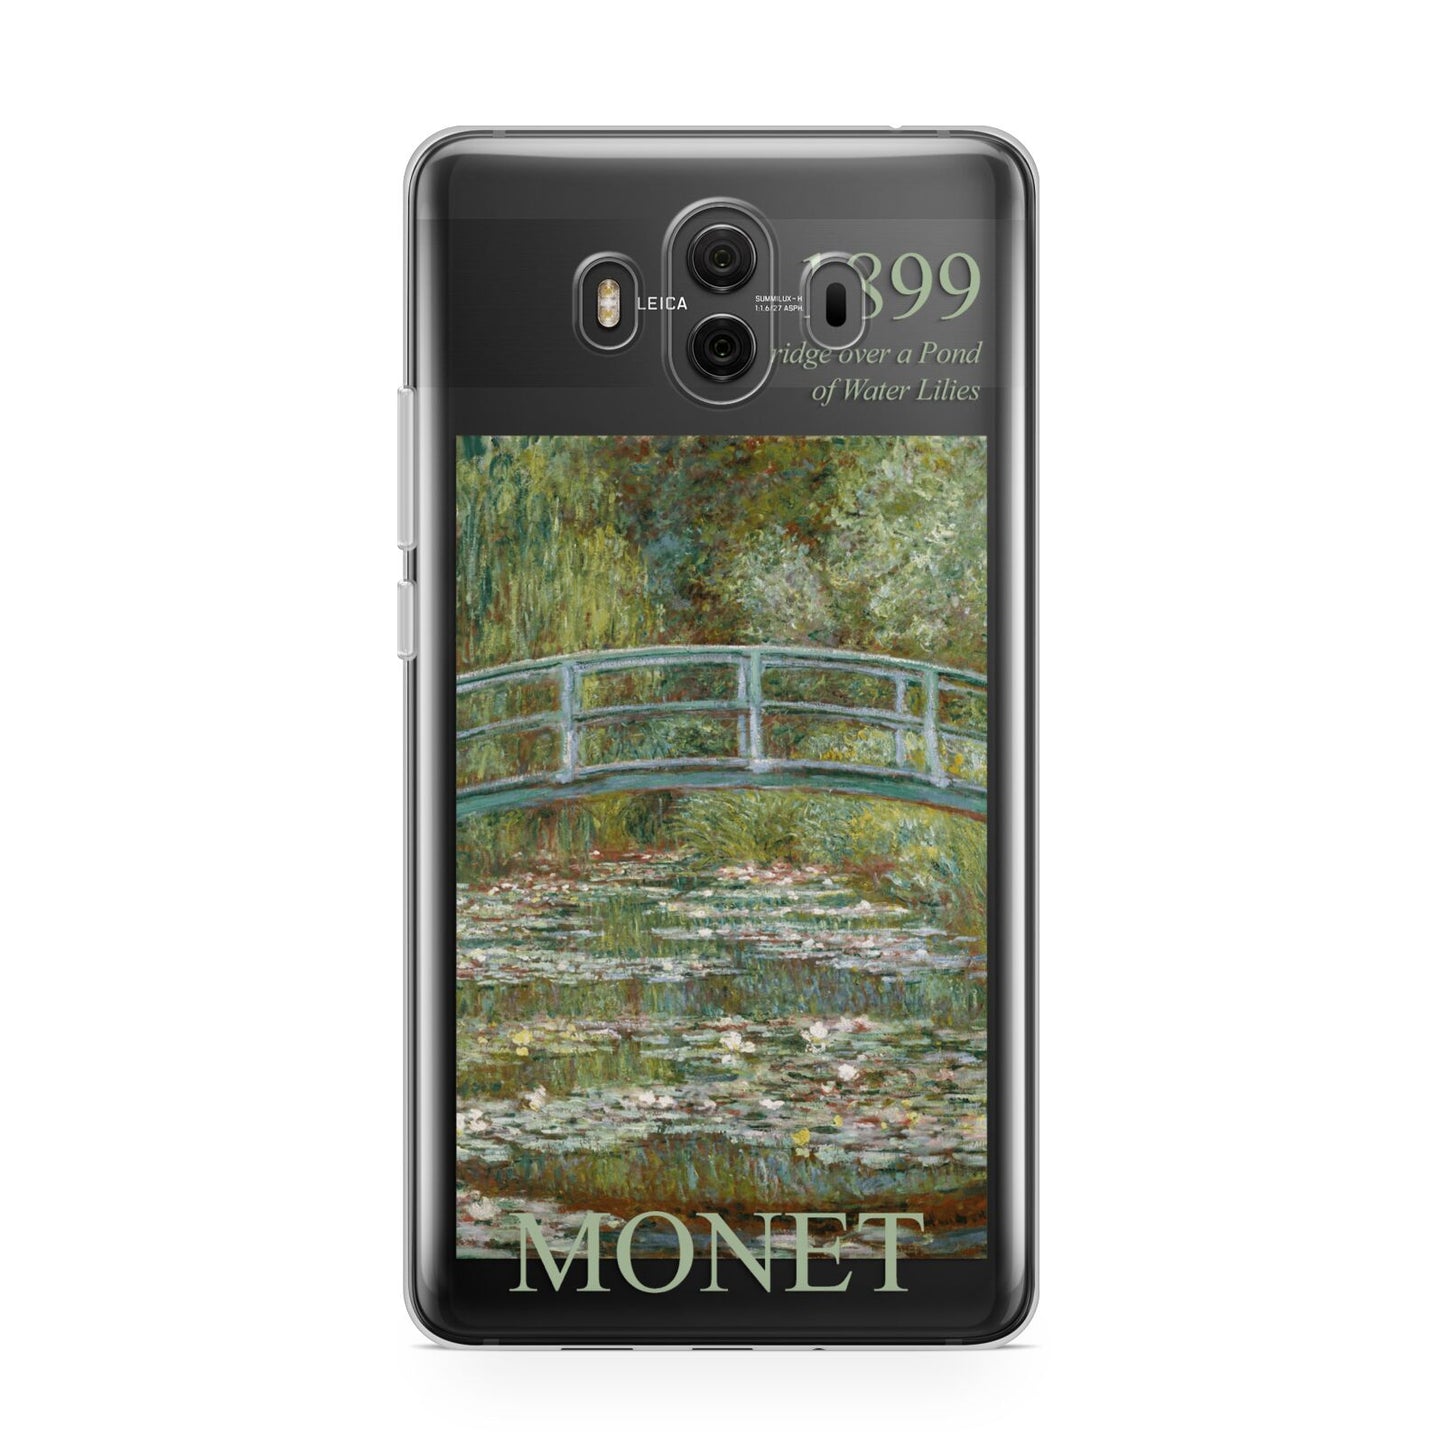 Bridge Over A Pond Of Water Lilies By Monet Huawei Mate 10 Protective Phone Case